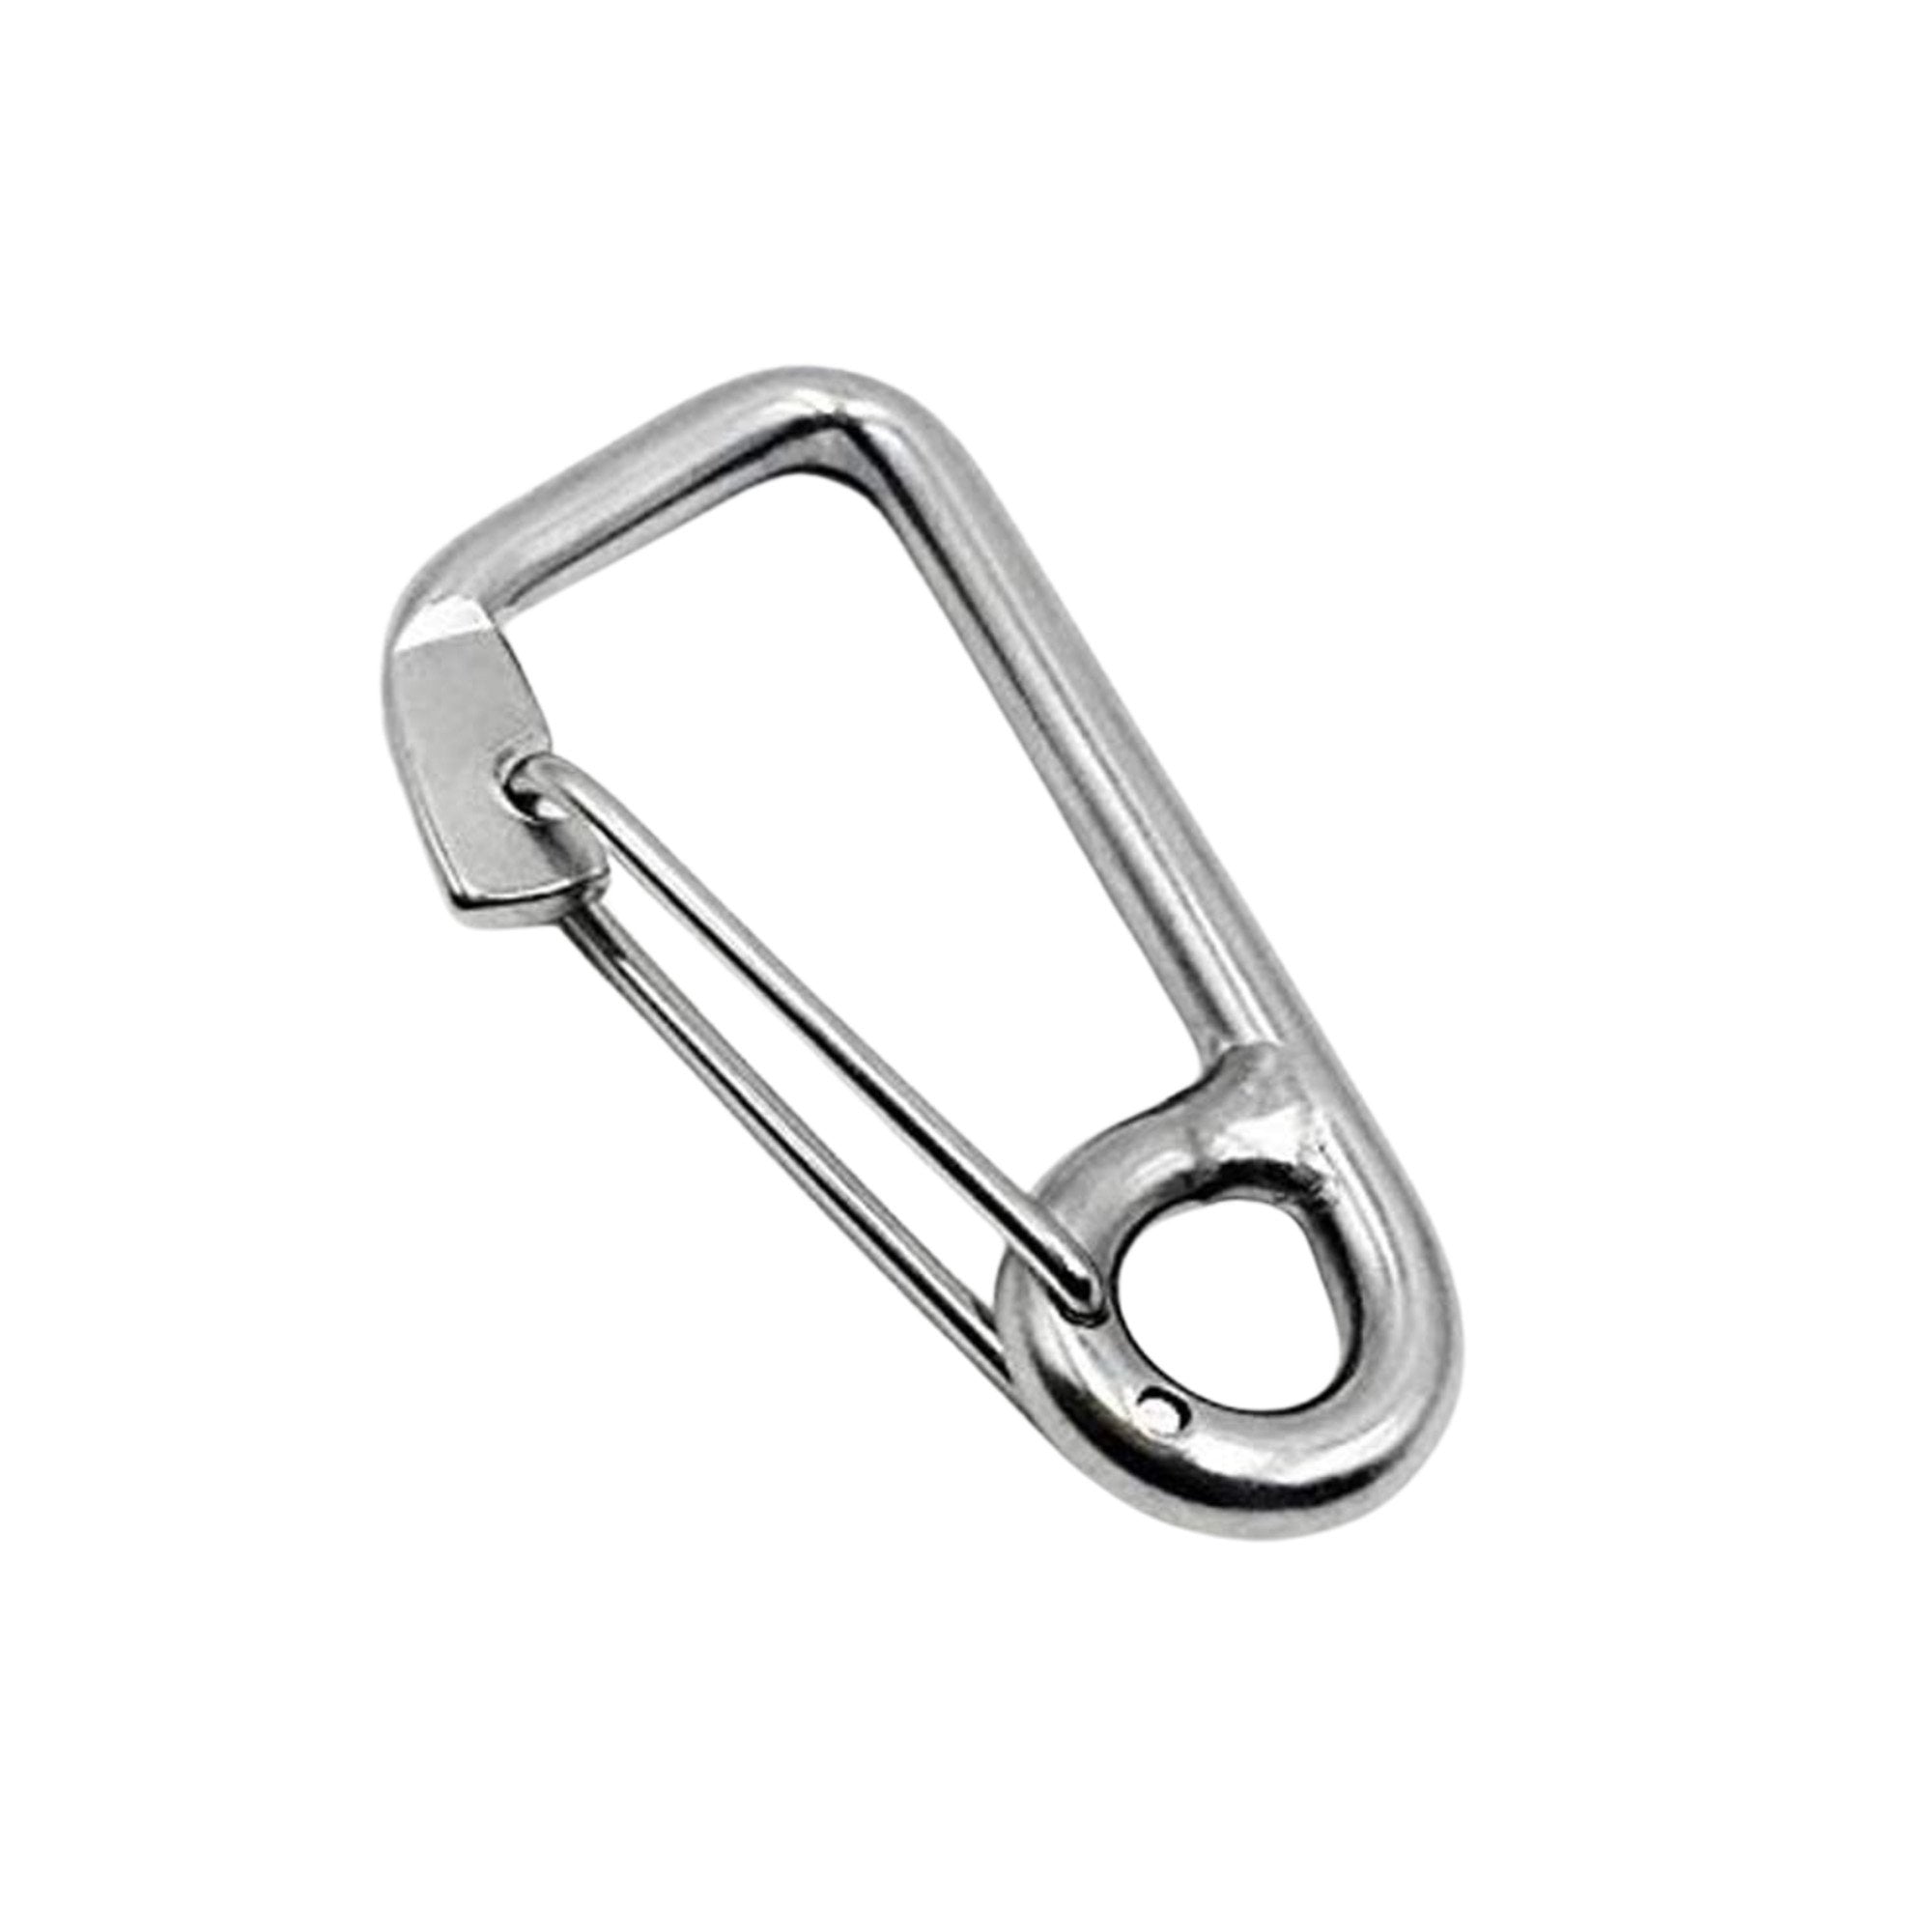  MOUNTAIN_ARK 304 Stainless Steel Spring Snap Hook, 4 inches  Heavy Duty Marine Grade Safety Clip, 3/8”(10 mm) Diameter Carabiner Hook  with Eye for Ship Boat (6 Pack) : Sports & Outdoors